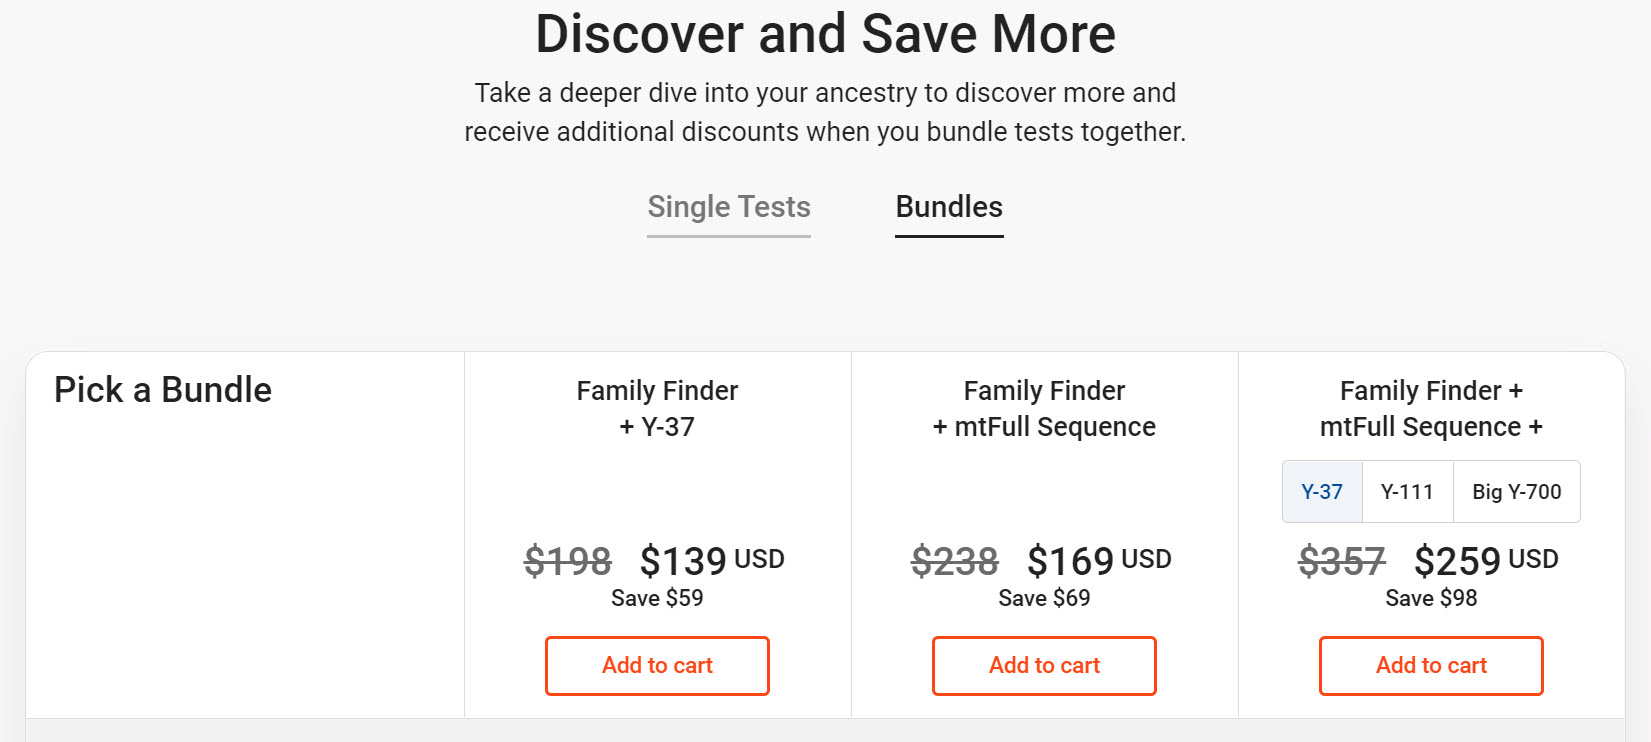 Save even more at FamilyTreeDNA when you bundle up this holiday season! To access the special pricing on bundles click HERE and then click BUNDLES at the top.